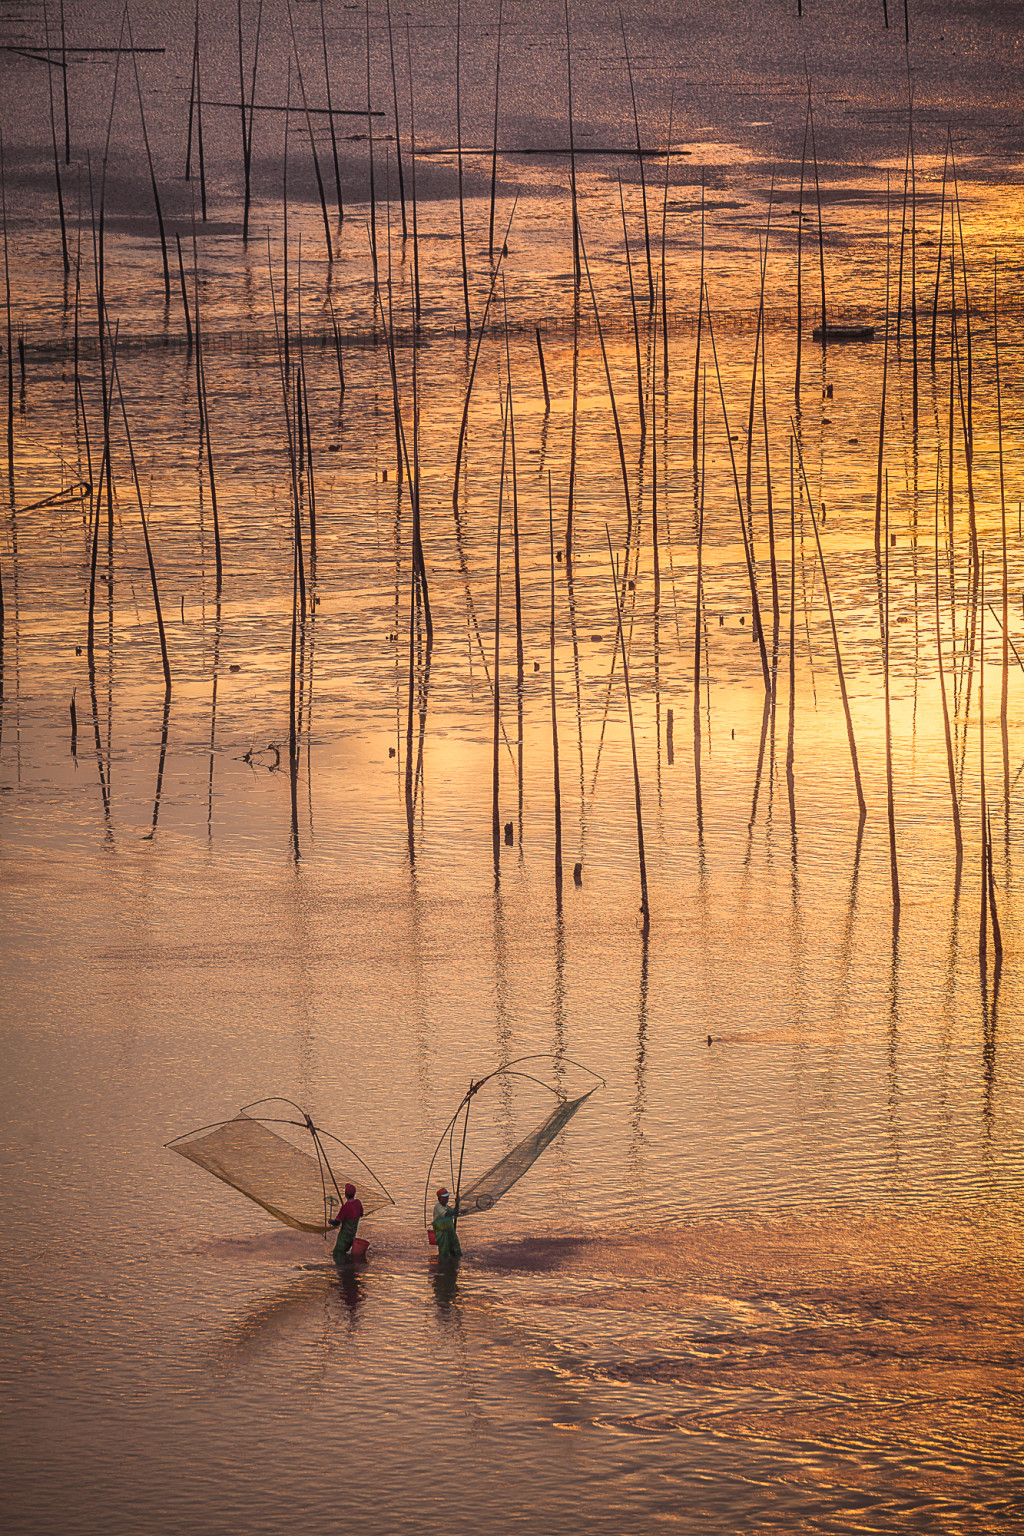 Men holding their nets during a beautiful sunrise at Bei Qi in XiaPu, China. XiaPu is famous for its mudflats that fill with water when the tide is in.